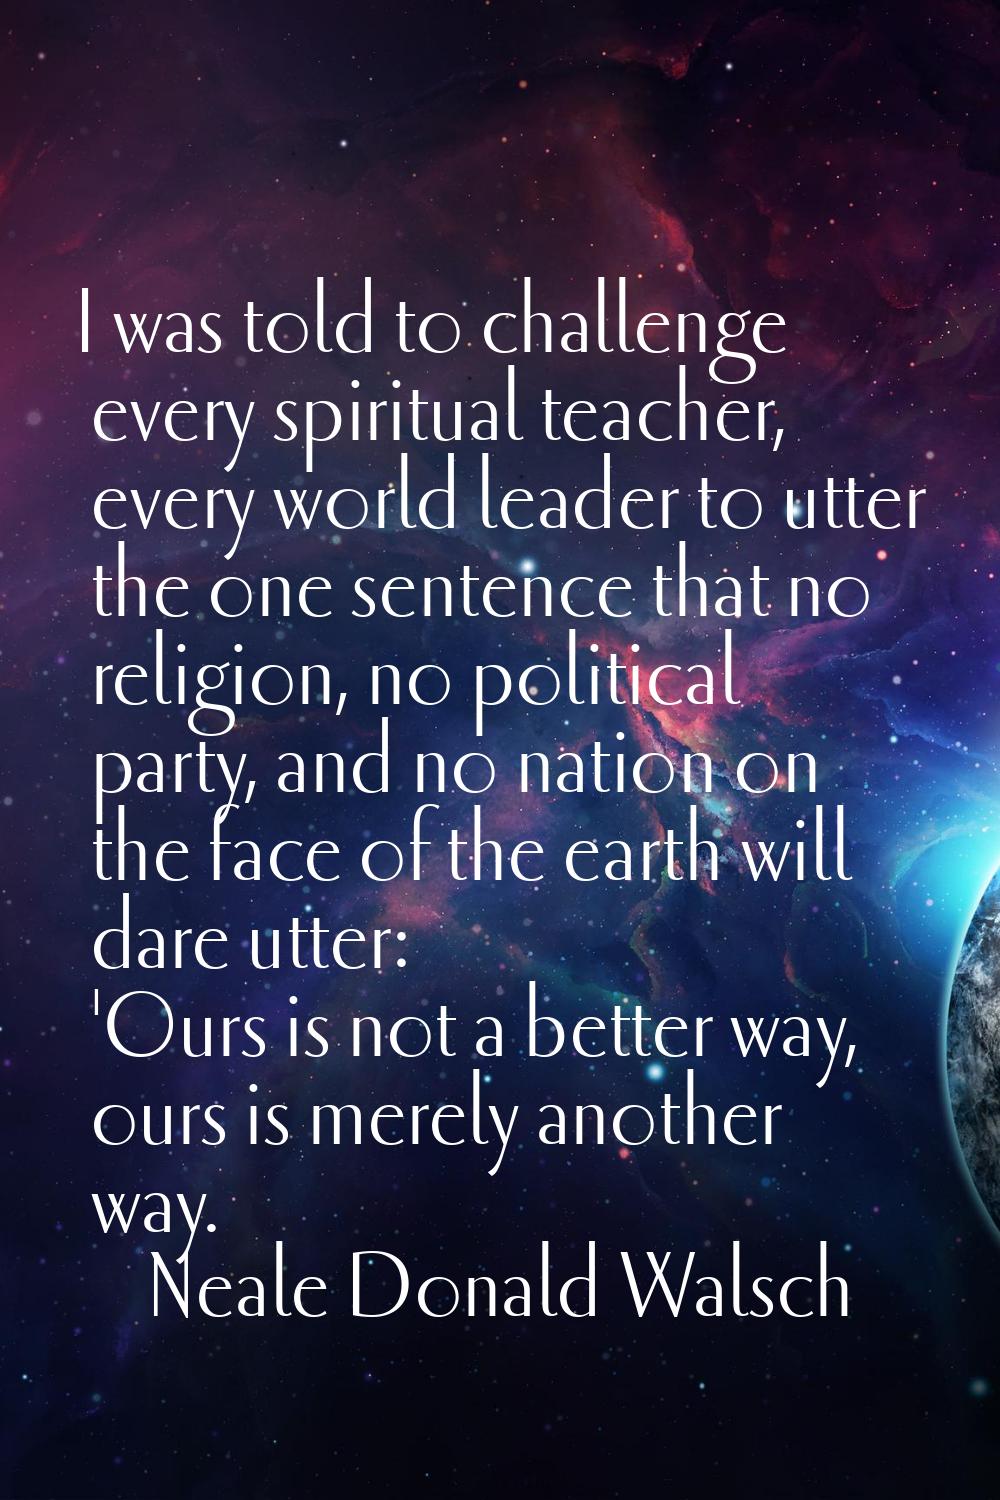 I was told to challenge every spiritual teacher, every world leader to utter the one sentence that 